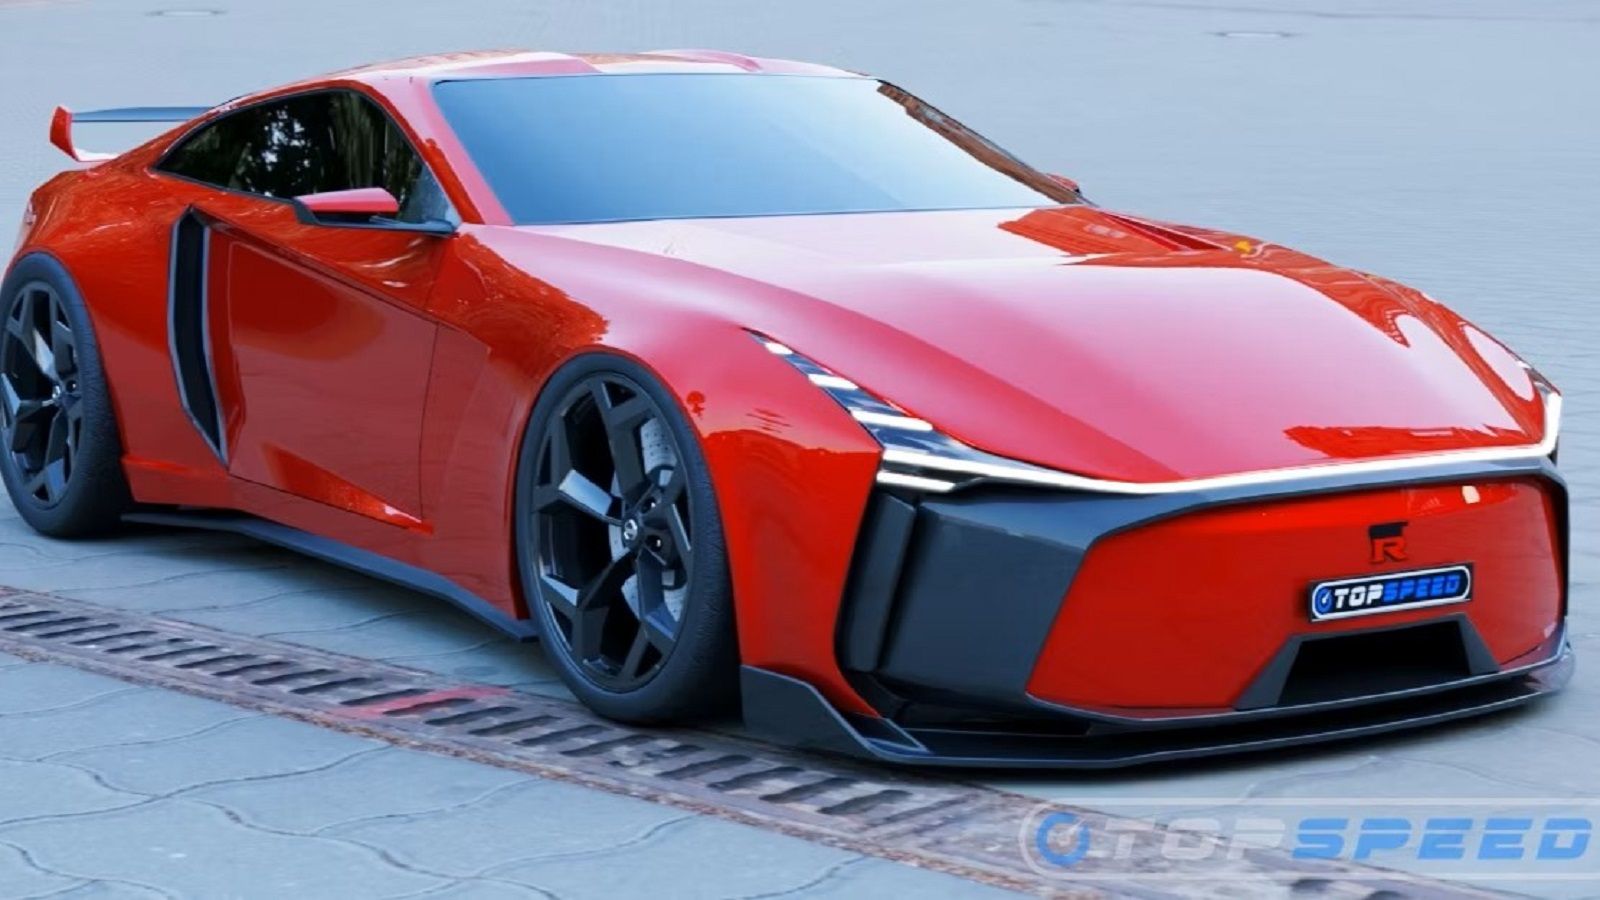 Nissan GT-R reborn as 1341bhp EV with solid-state battery